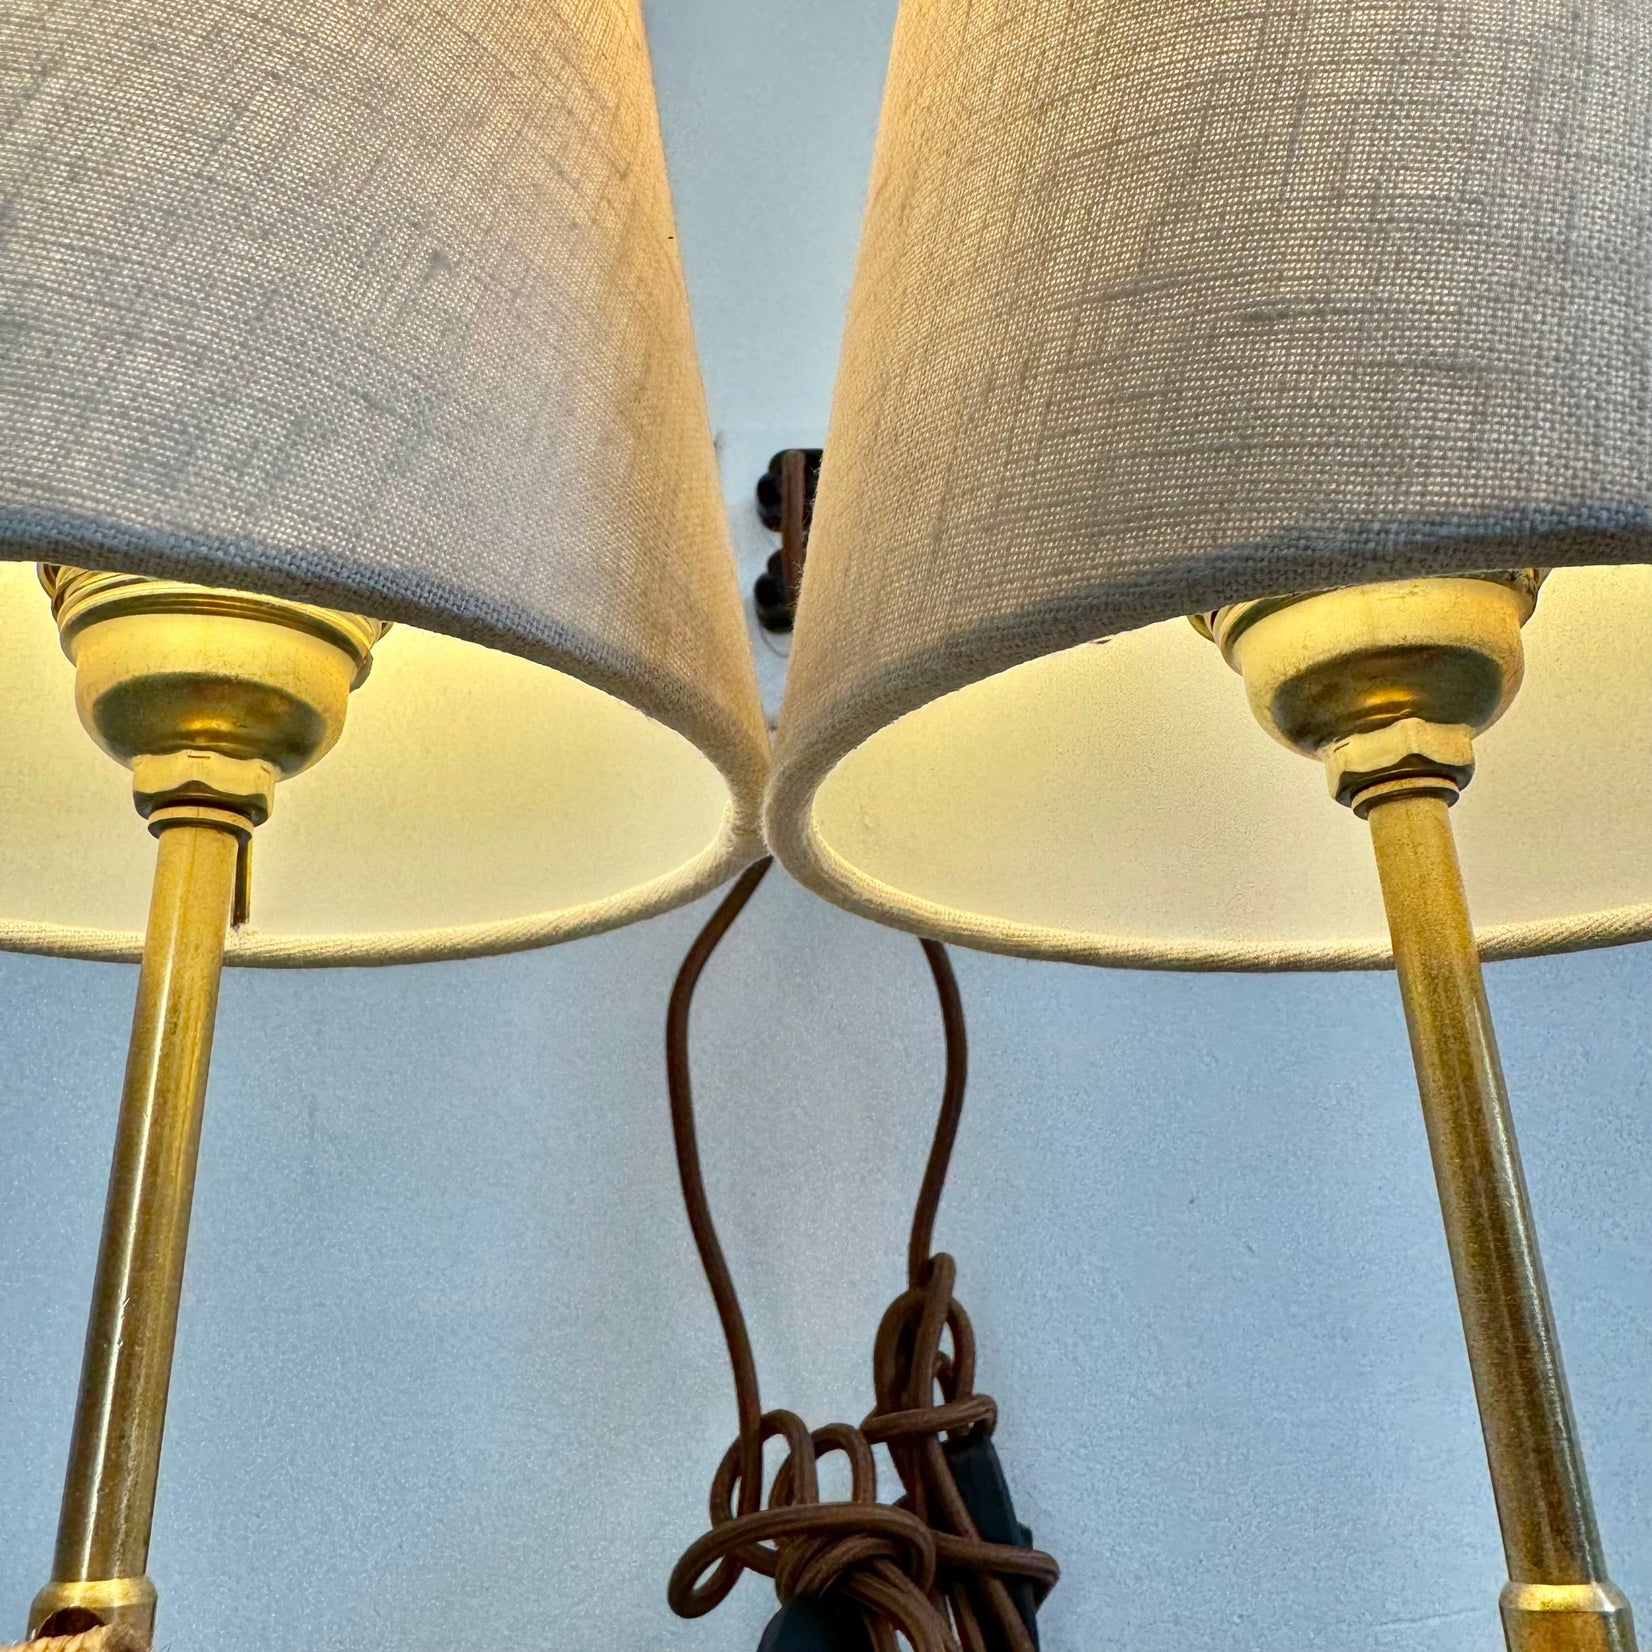 Pair of Rope and Brass Table Lamps